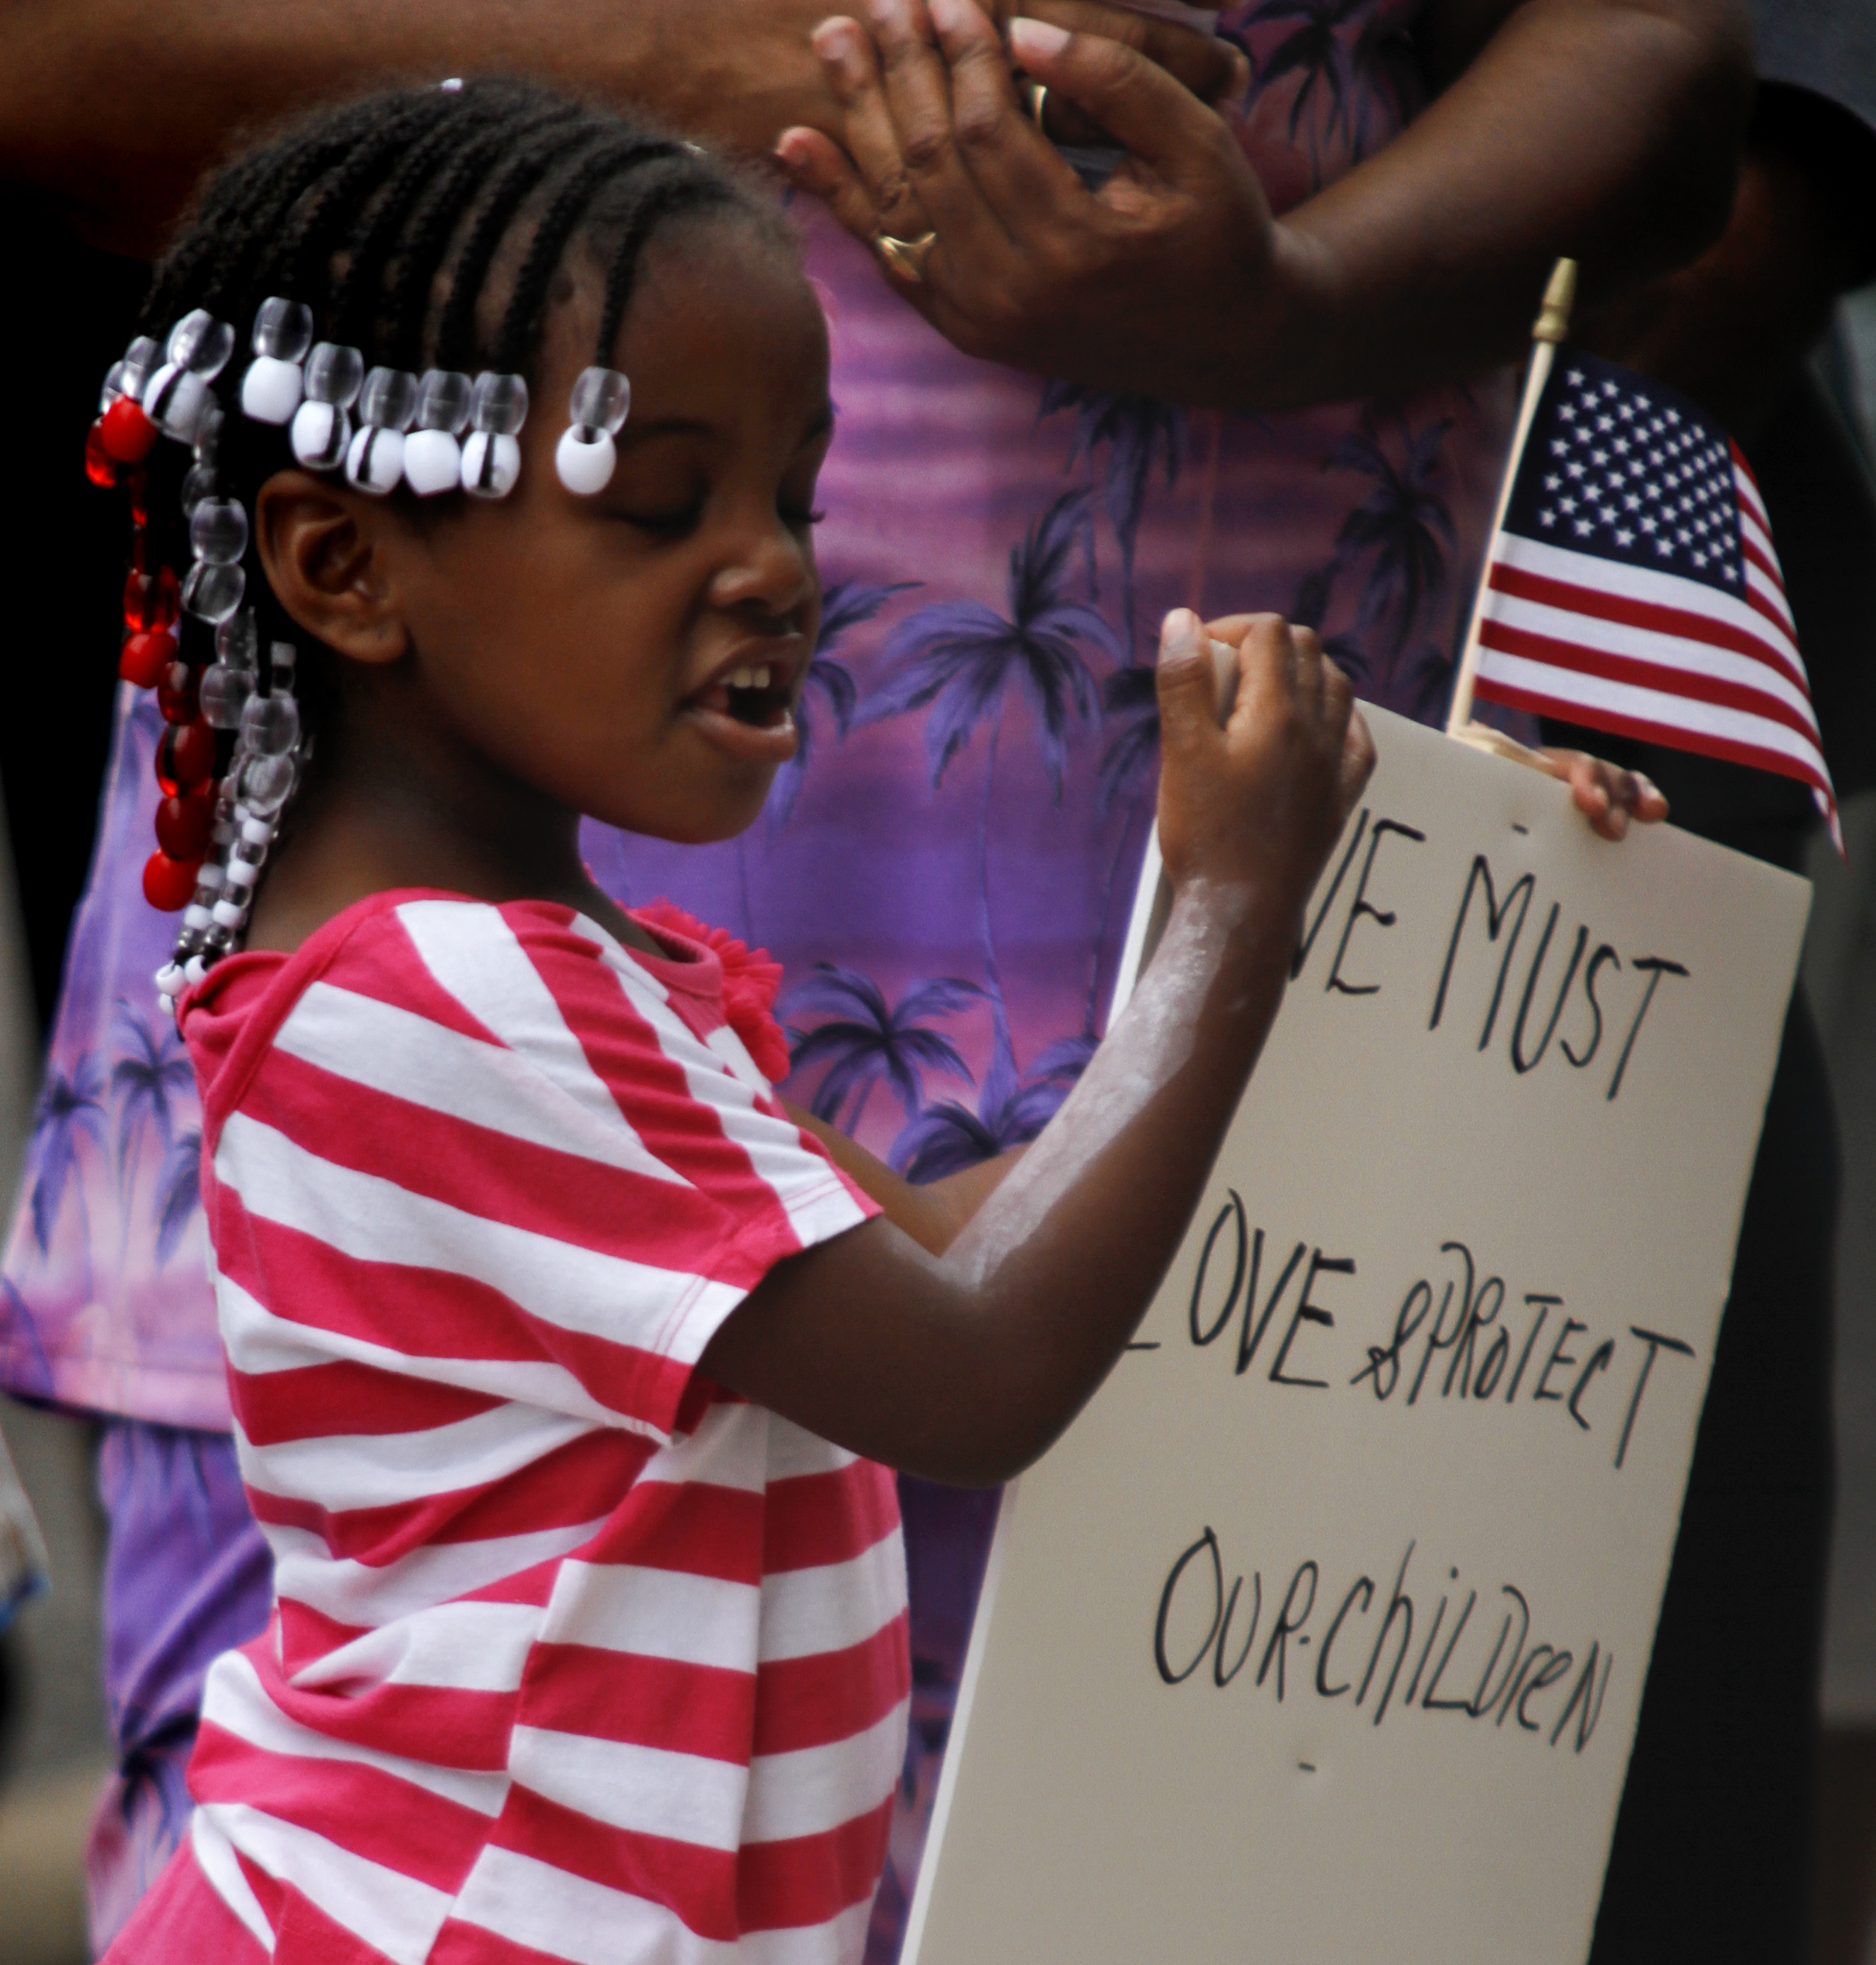 MADELYN P. HASTINGS | THE VINDICATOR

Ja'Layia Hunter, 4, wears white paint on her skin while participating in a "Justice for Trayvon" rally on the steps of the Mahoning County Courthouse on Saturday, July 20.